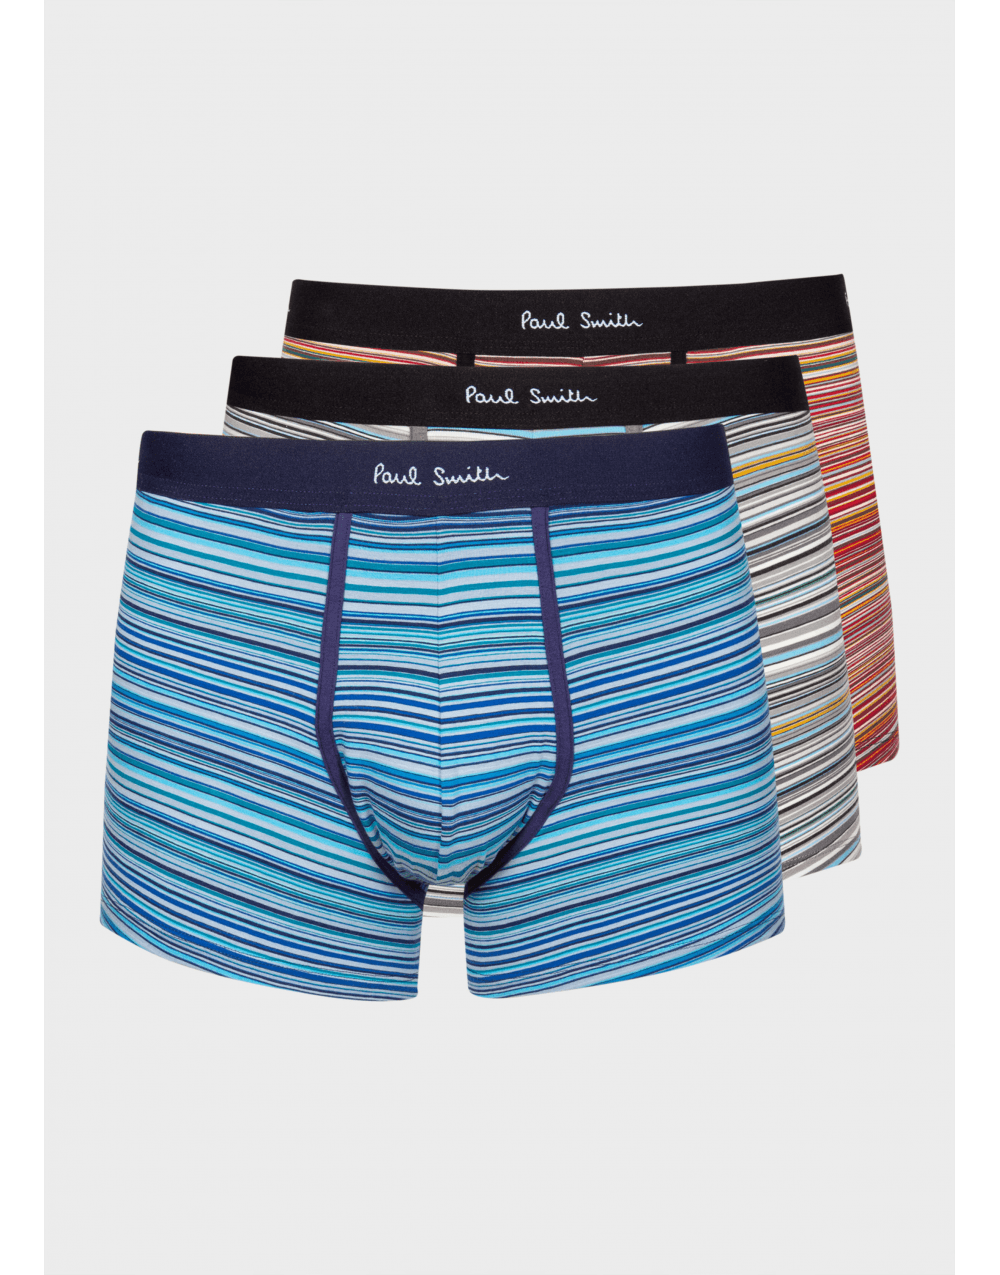 Paul Smith Paul Smith 3 Pack Underwear Col: Grey/blue/red All Stripe, Size: L